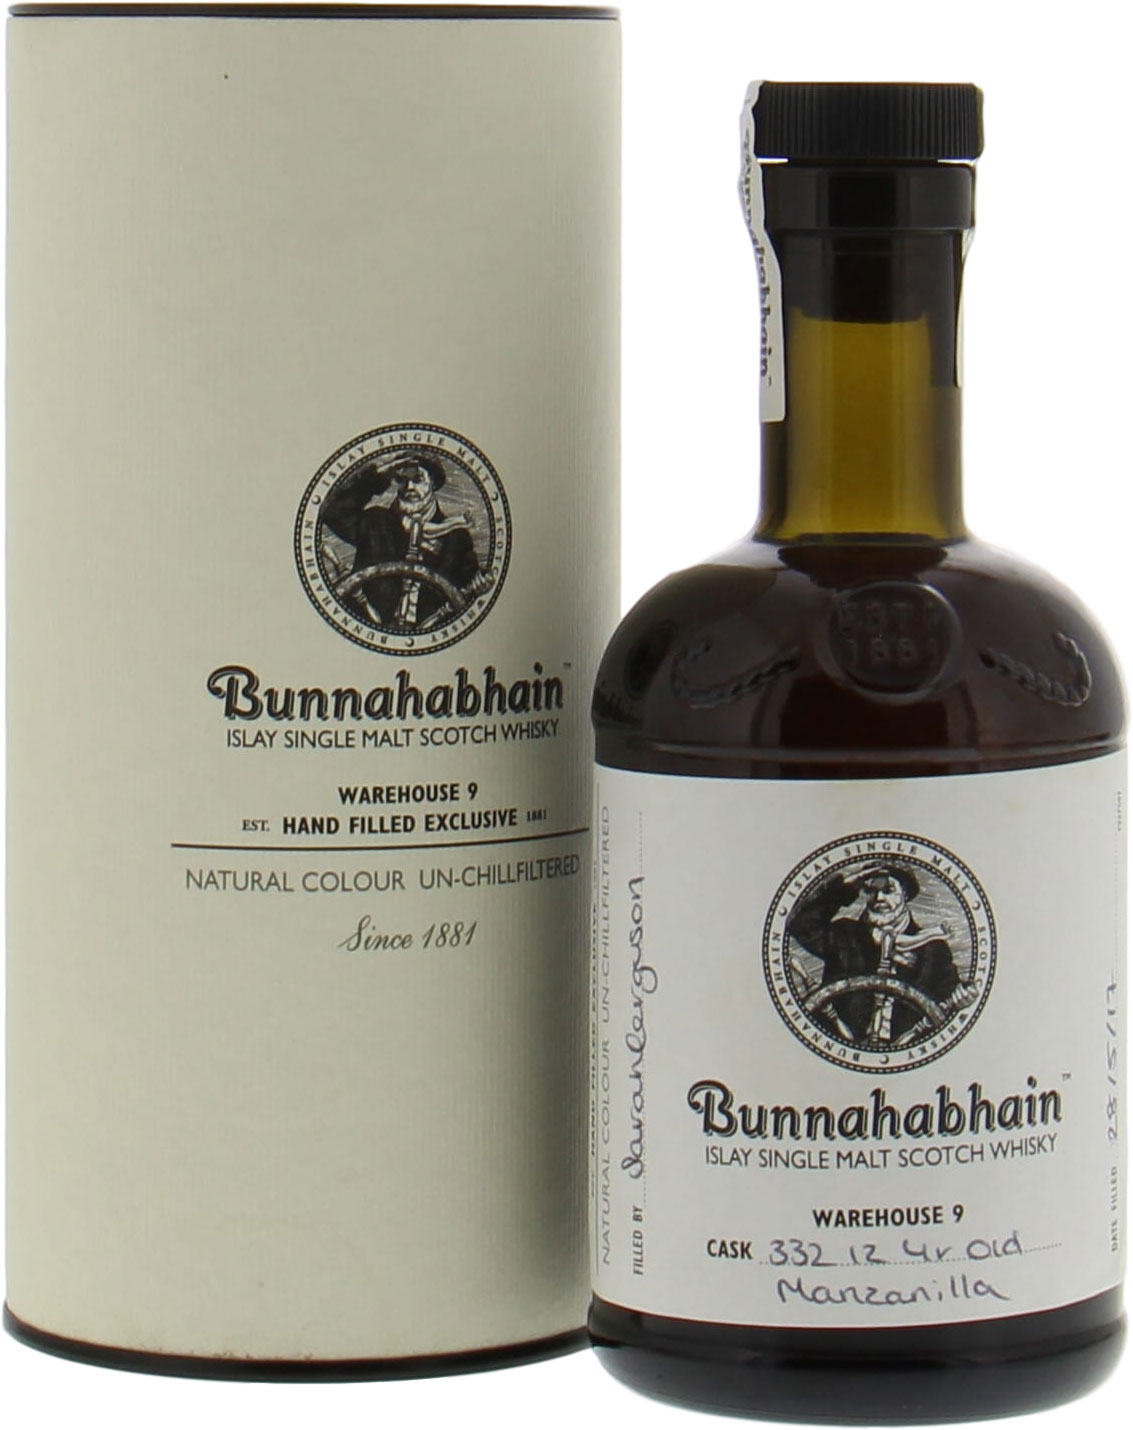 Bunnahabhain - 12 Years Old Distillery Exlusive Warehouse 9 Cask:332 Hand Filled 52.4% 2005 In Original Container